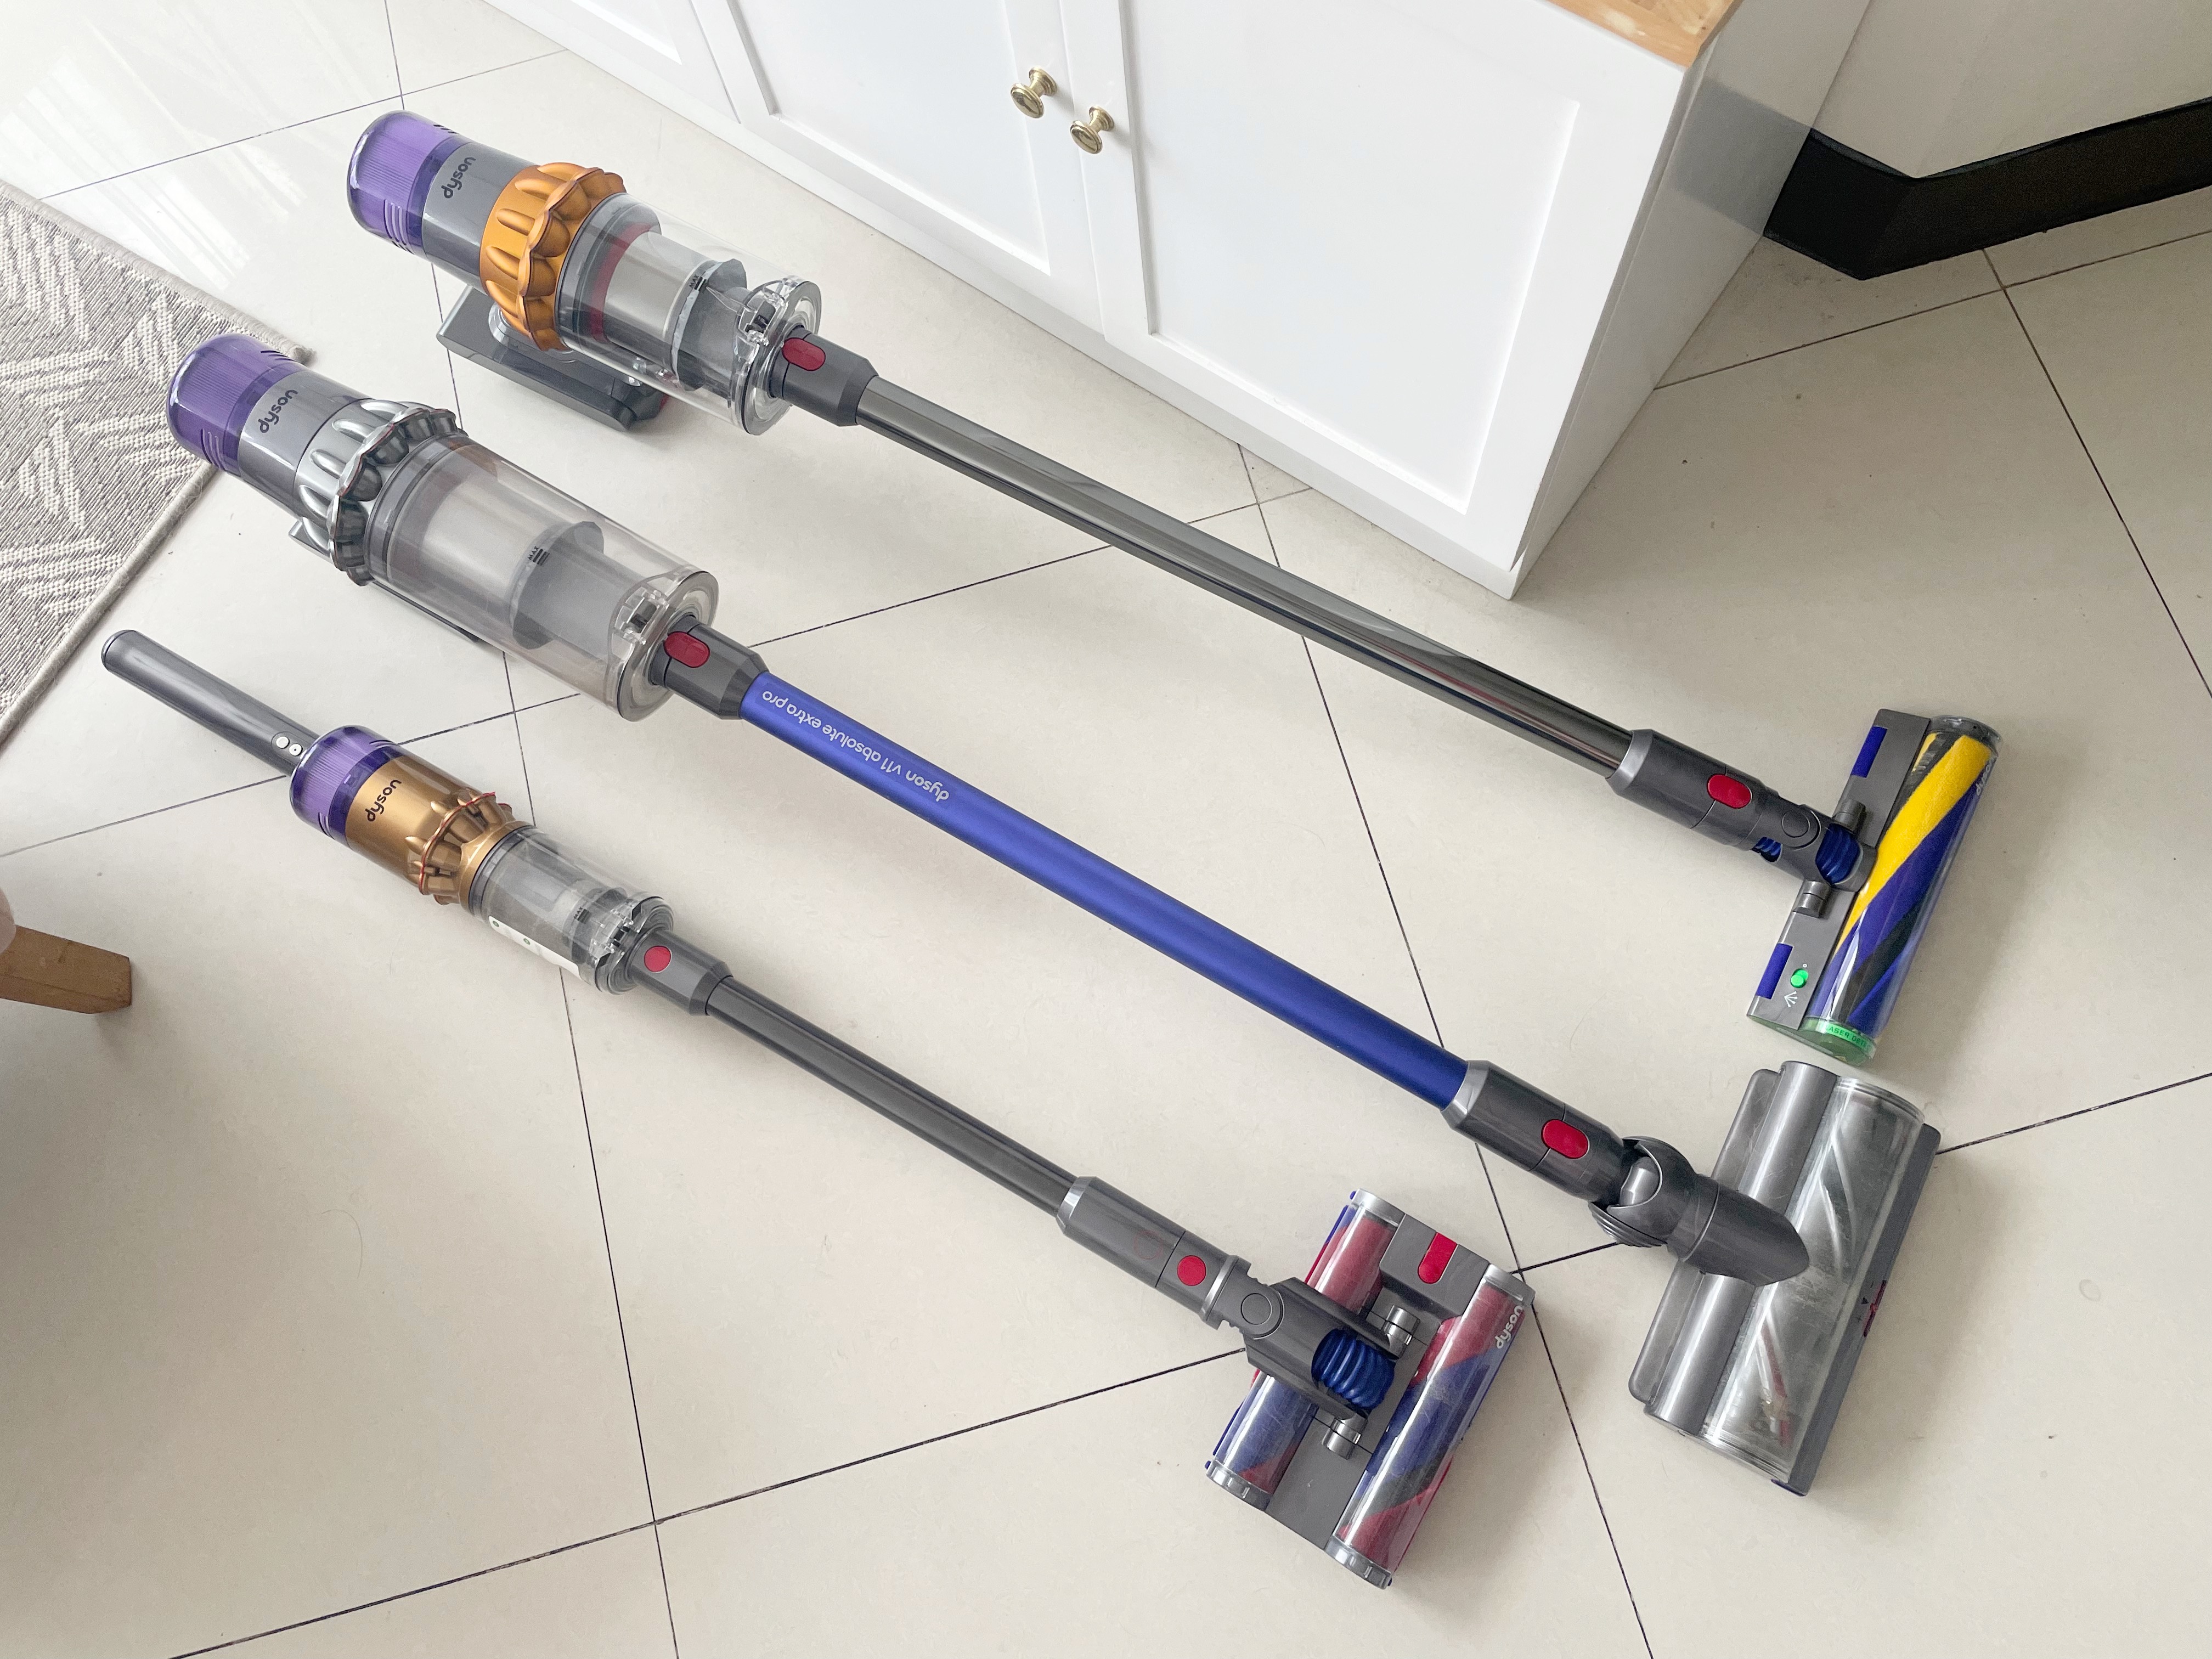 Why you should upgrade the Dyson - GadgetMatch